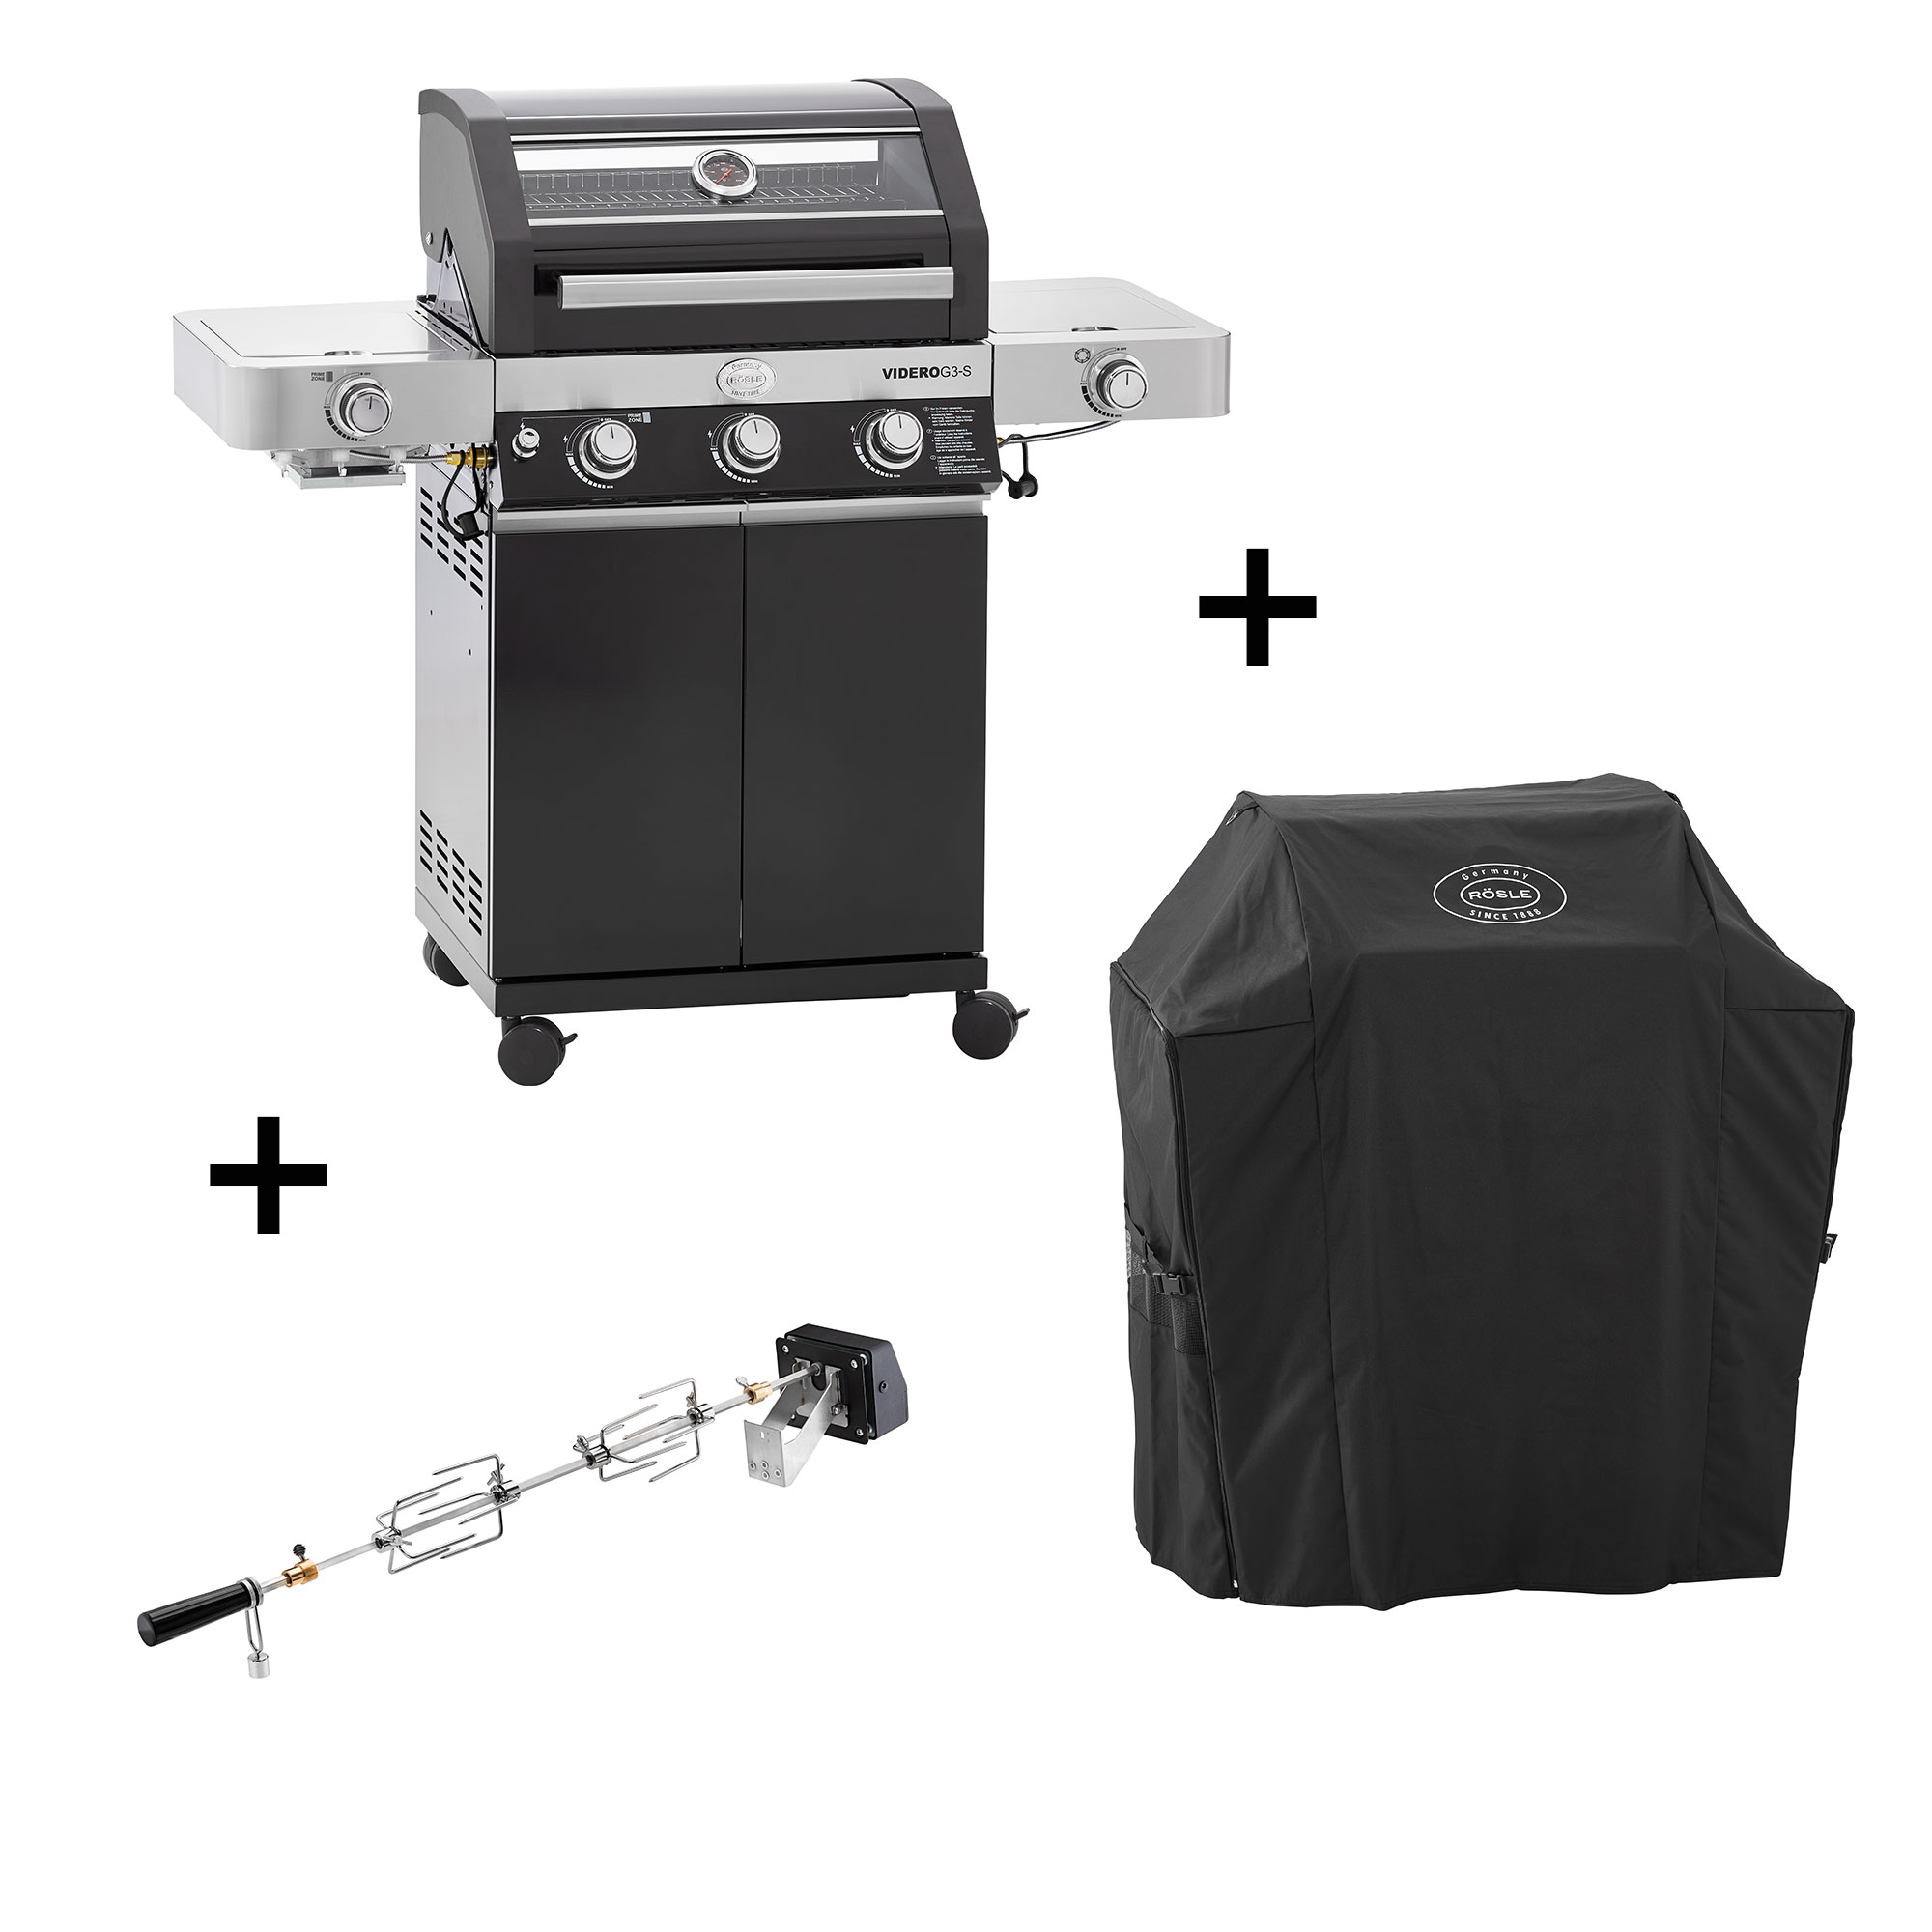 Gas grill BBQ station VIDERO G3-S Vario+ 50 mbar incl. cover and rotisserie